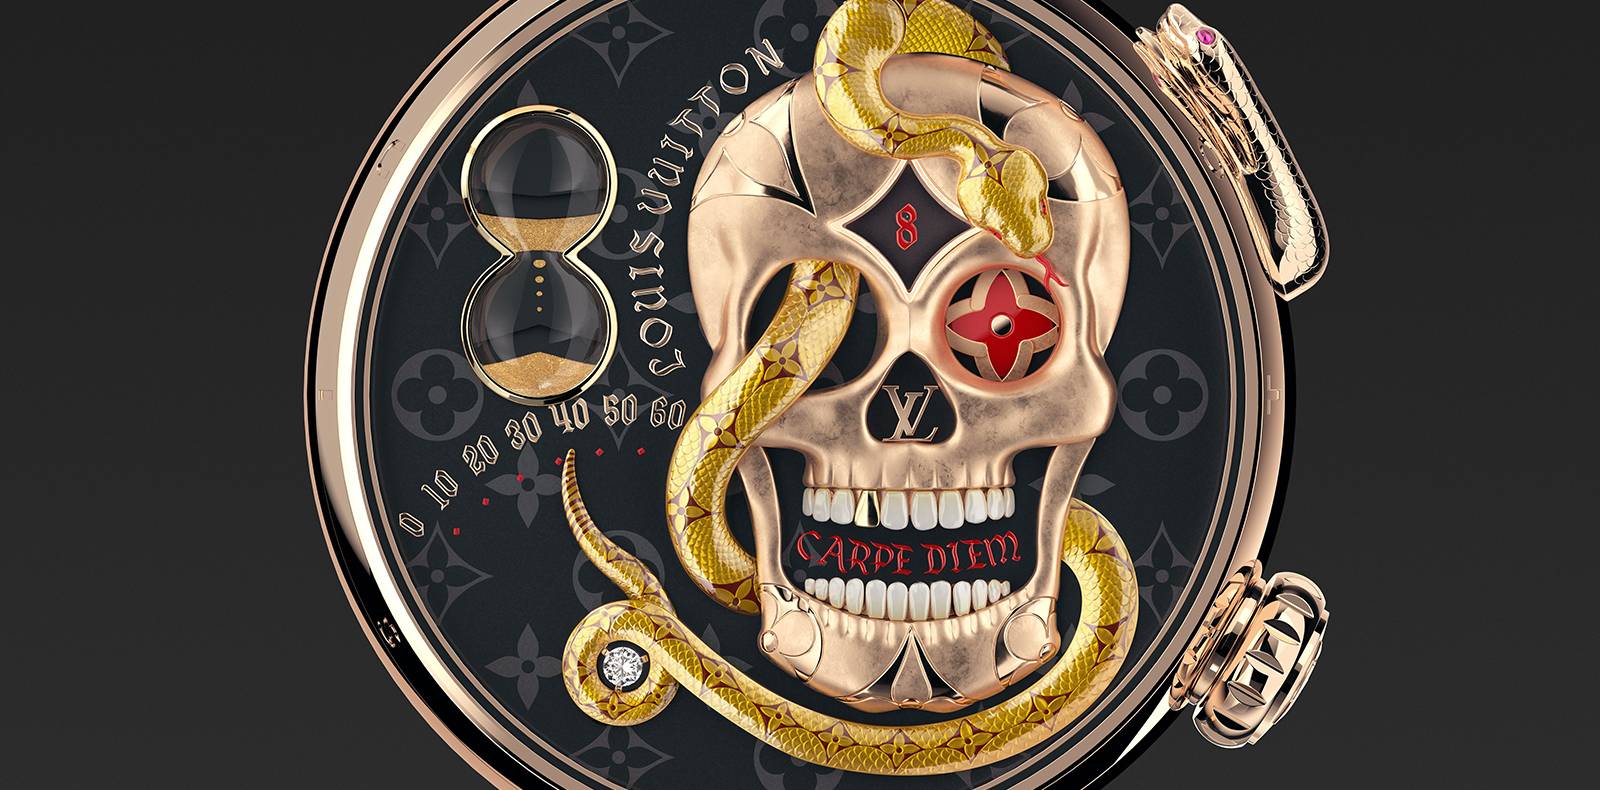 Louis Vuitton Tambour Carpe Diem A friendly reminder to not get so  attached and we will all die one day So seize the day  rWatches